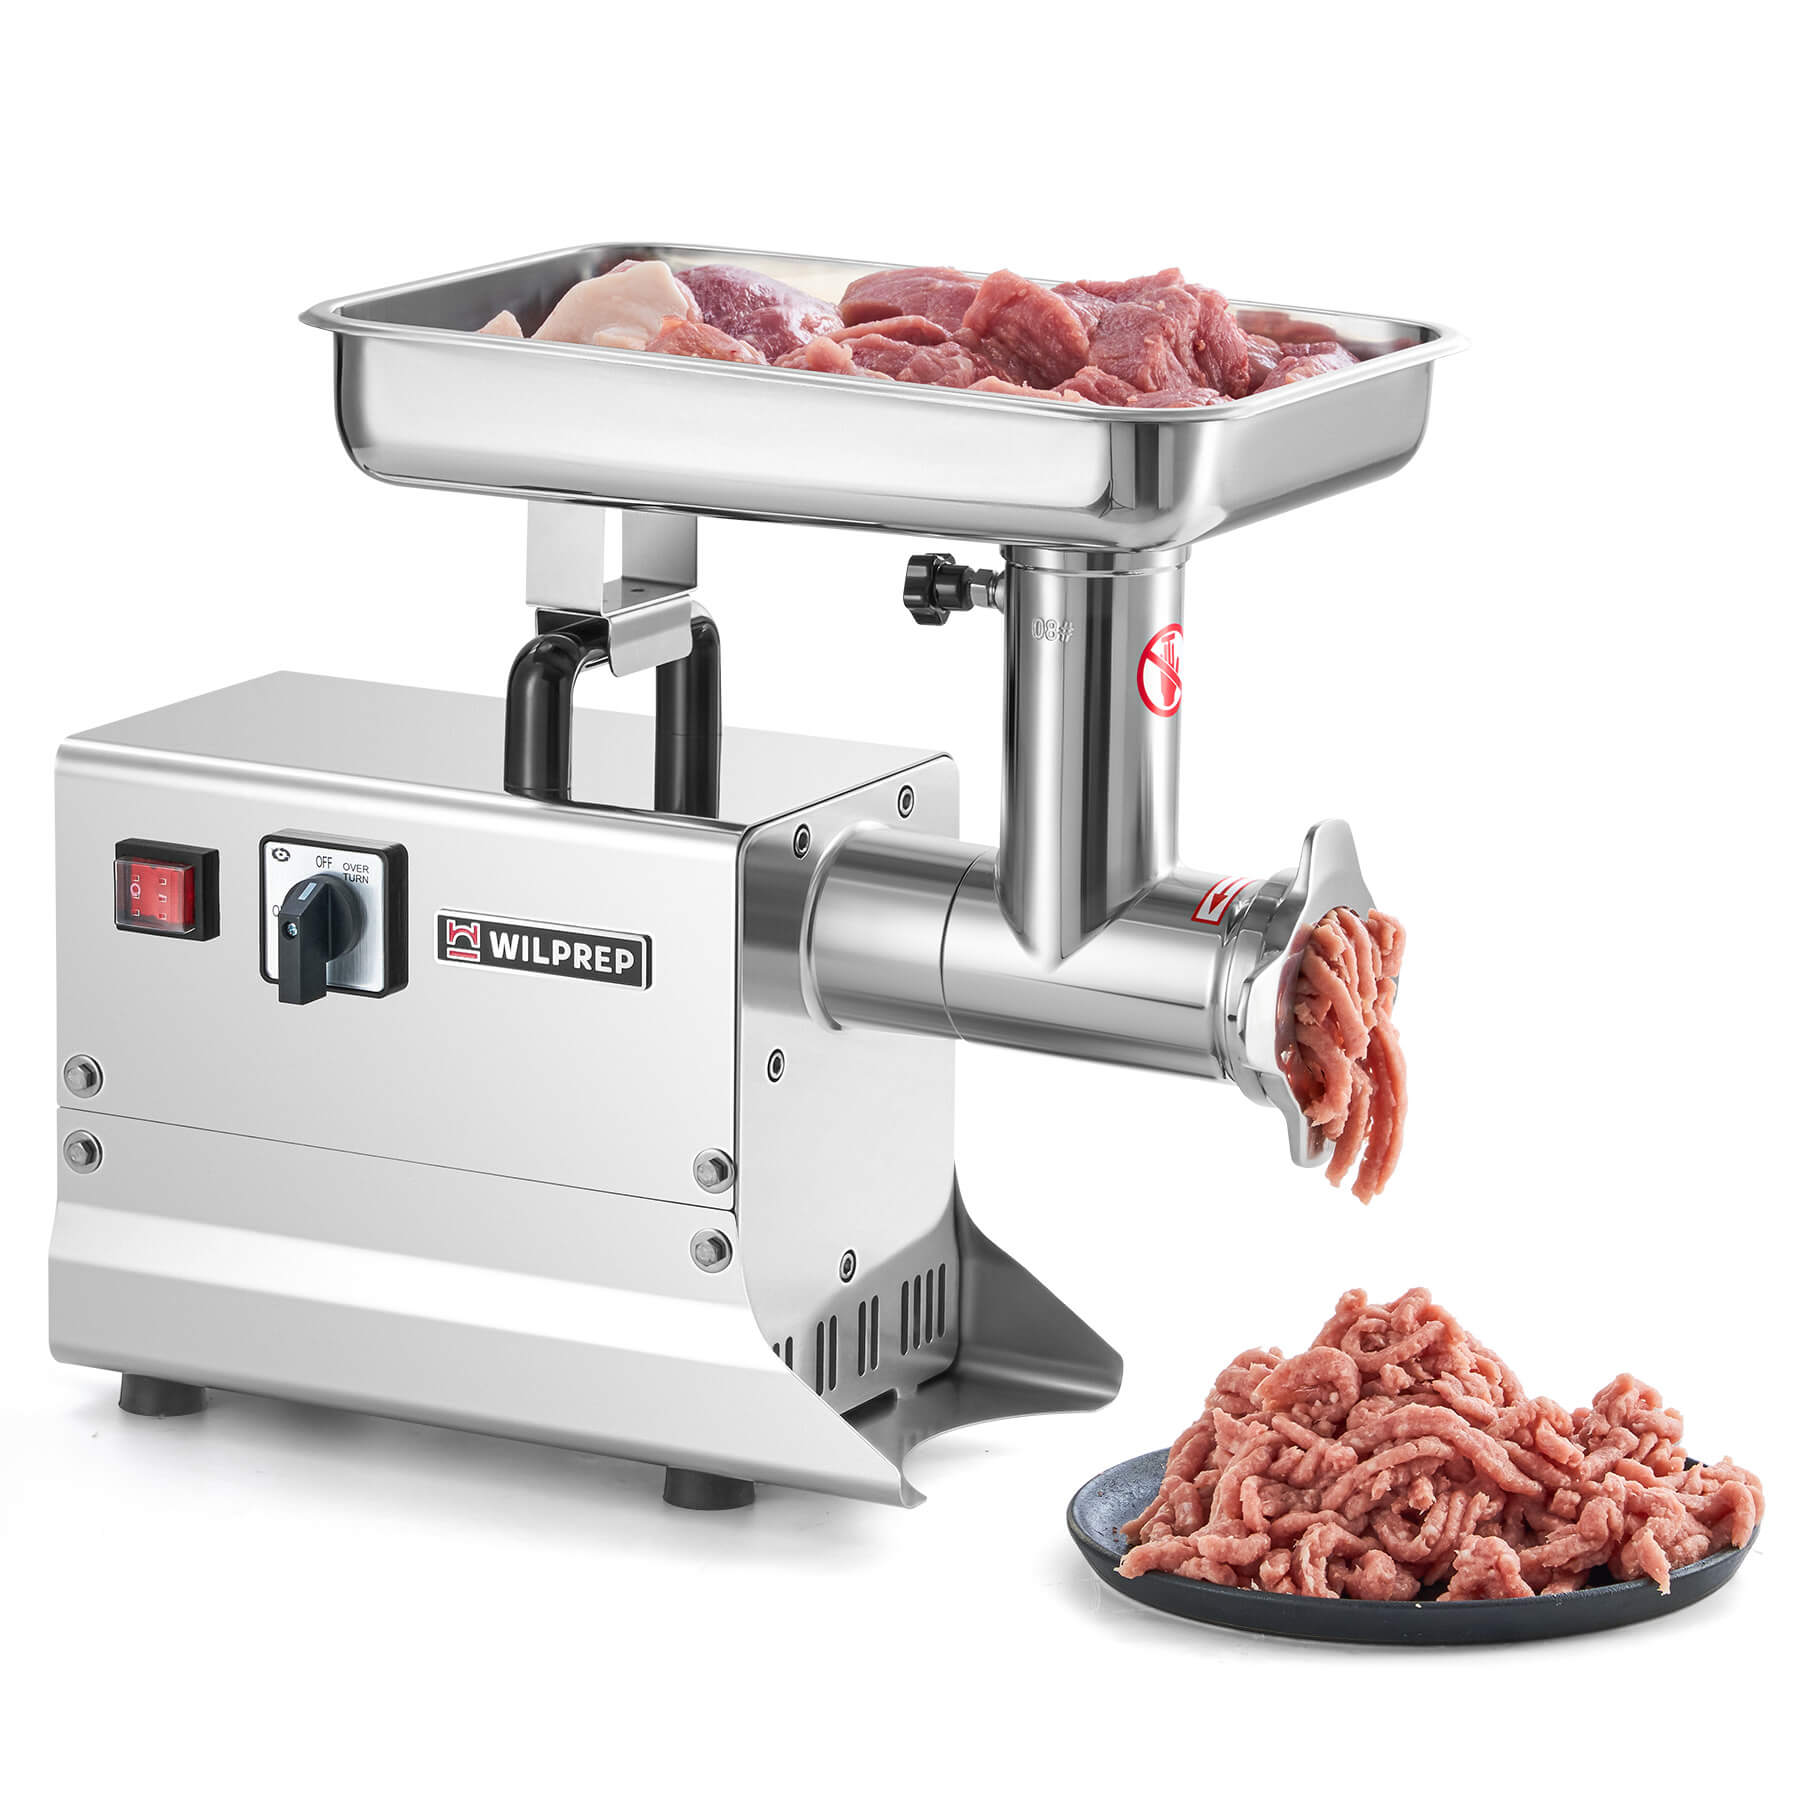 300W Electric Meat Grinder with Reverse Function ETL Approved-110V,2/5 hp